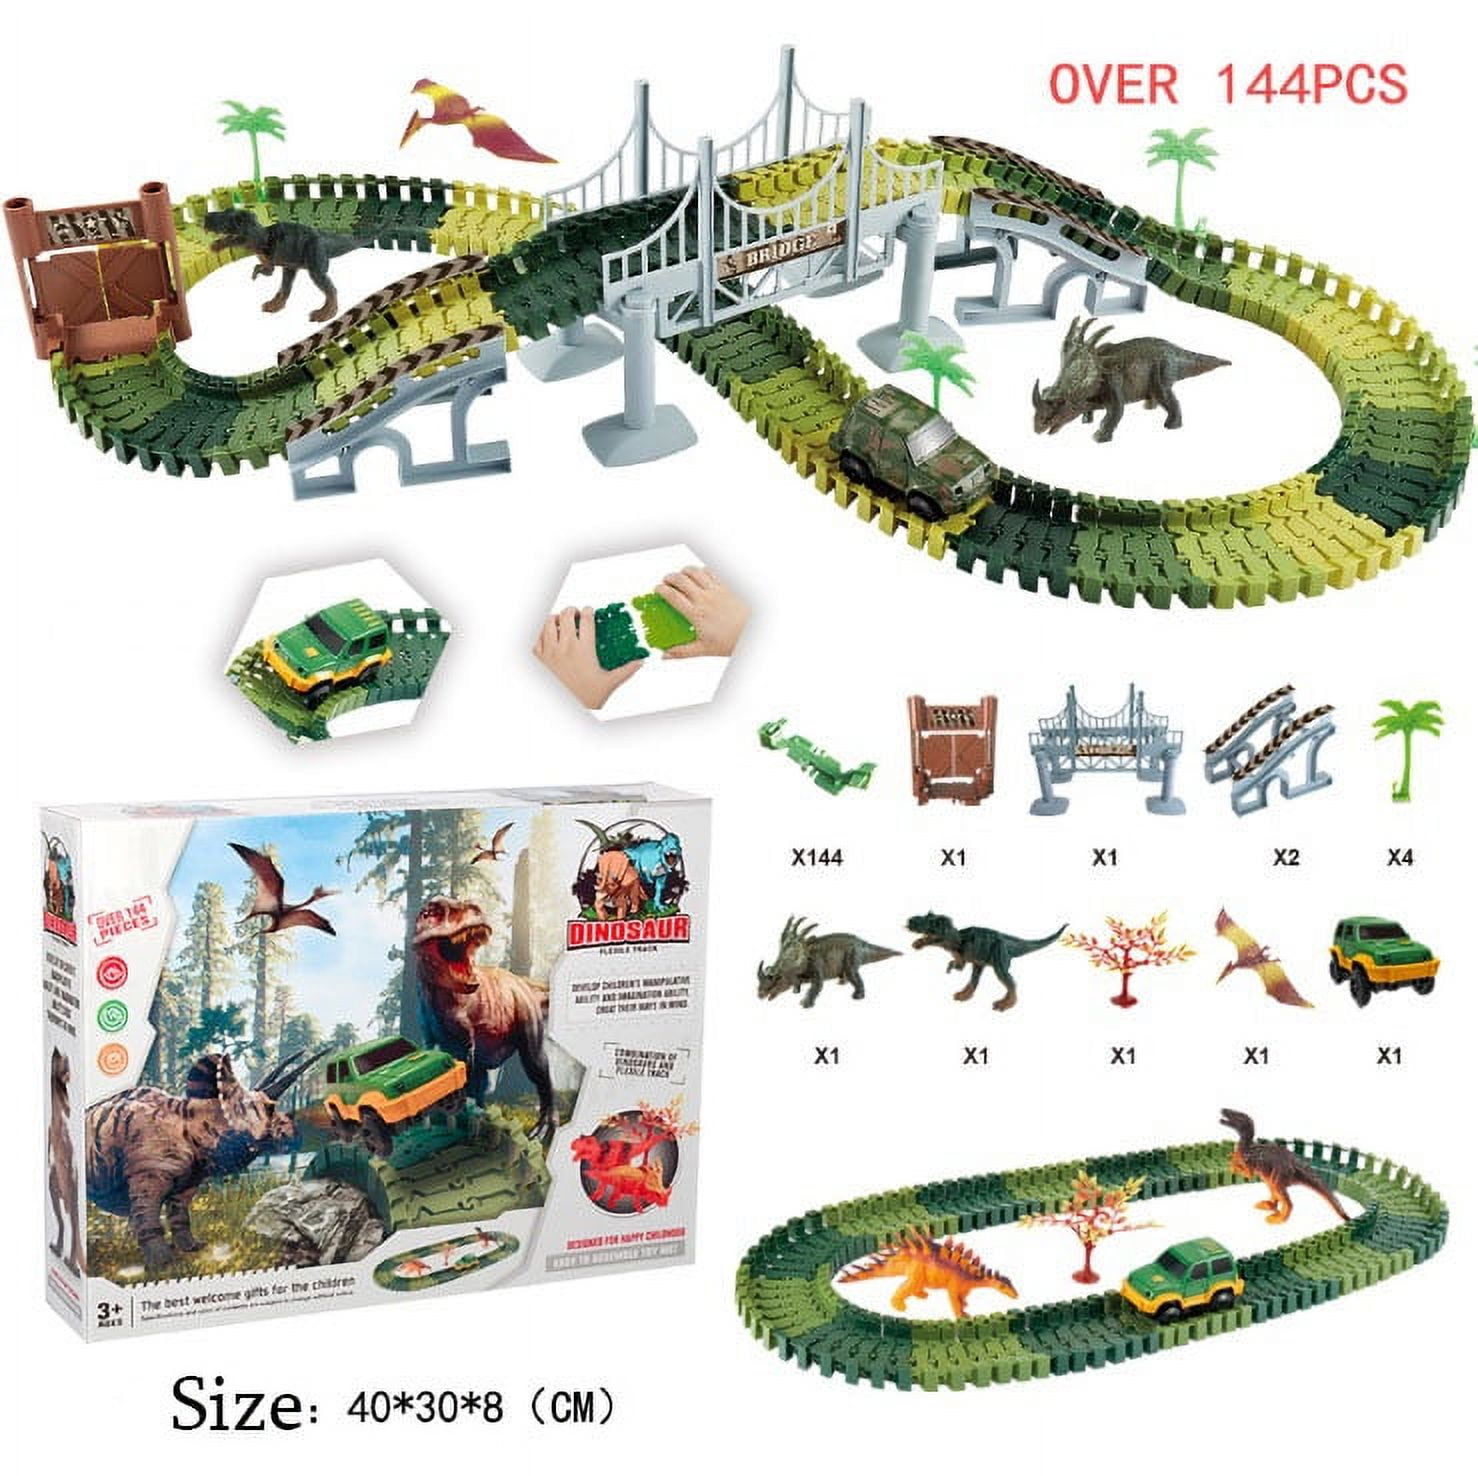  Dinosaur World Race Track Toys for Kids - Best Birthday Gifts  for Age 3 4 5 6 7 Year Old Boys and Girls, PREPOP Deluxe Dino Sets, 220 pcs  : Toys & Games